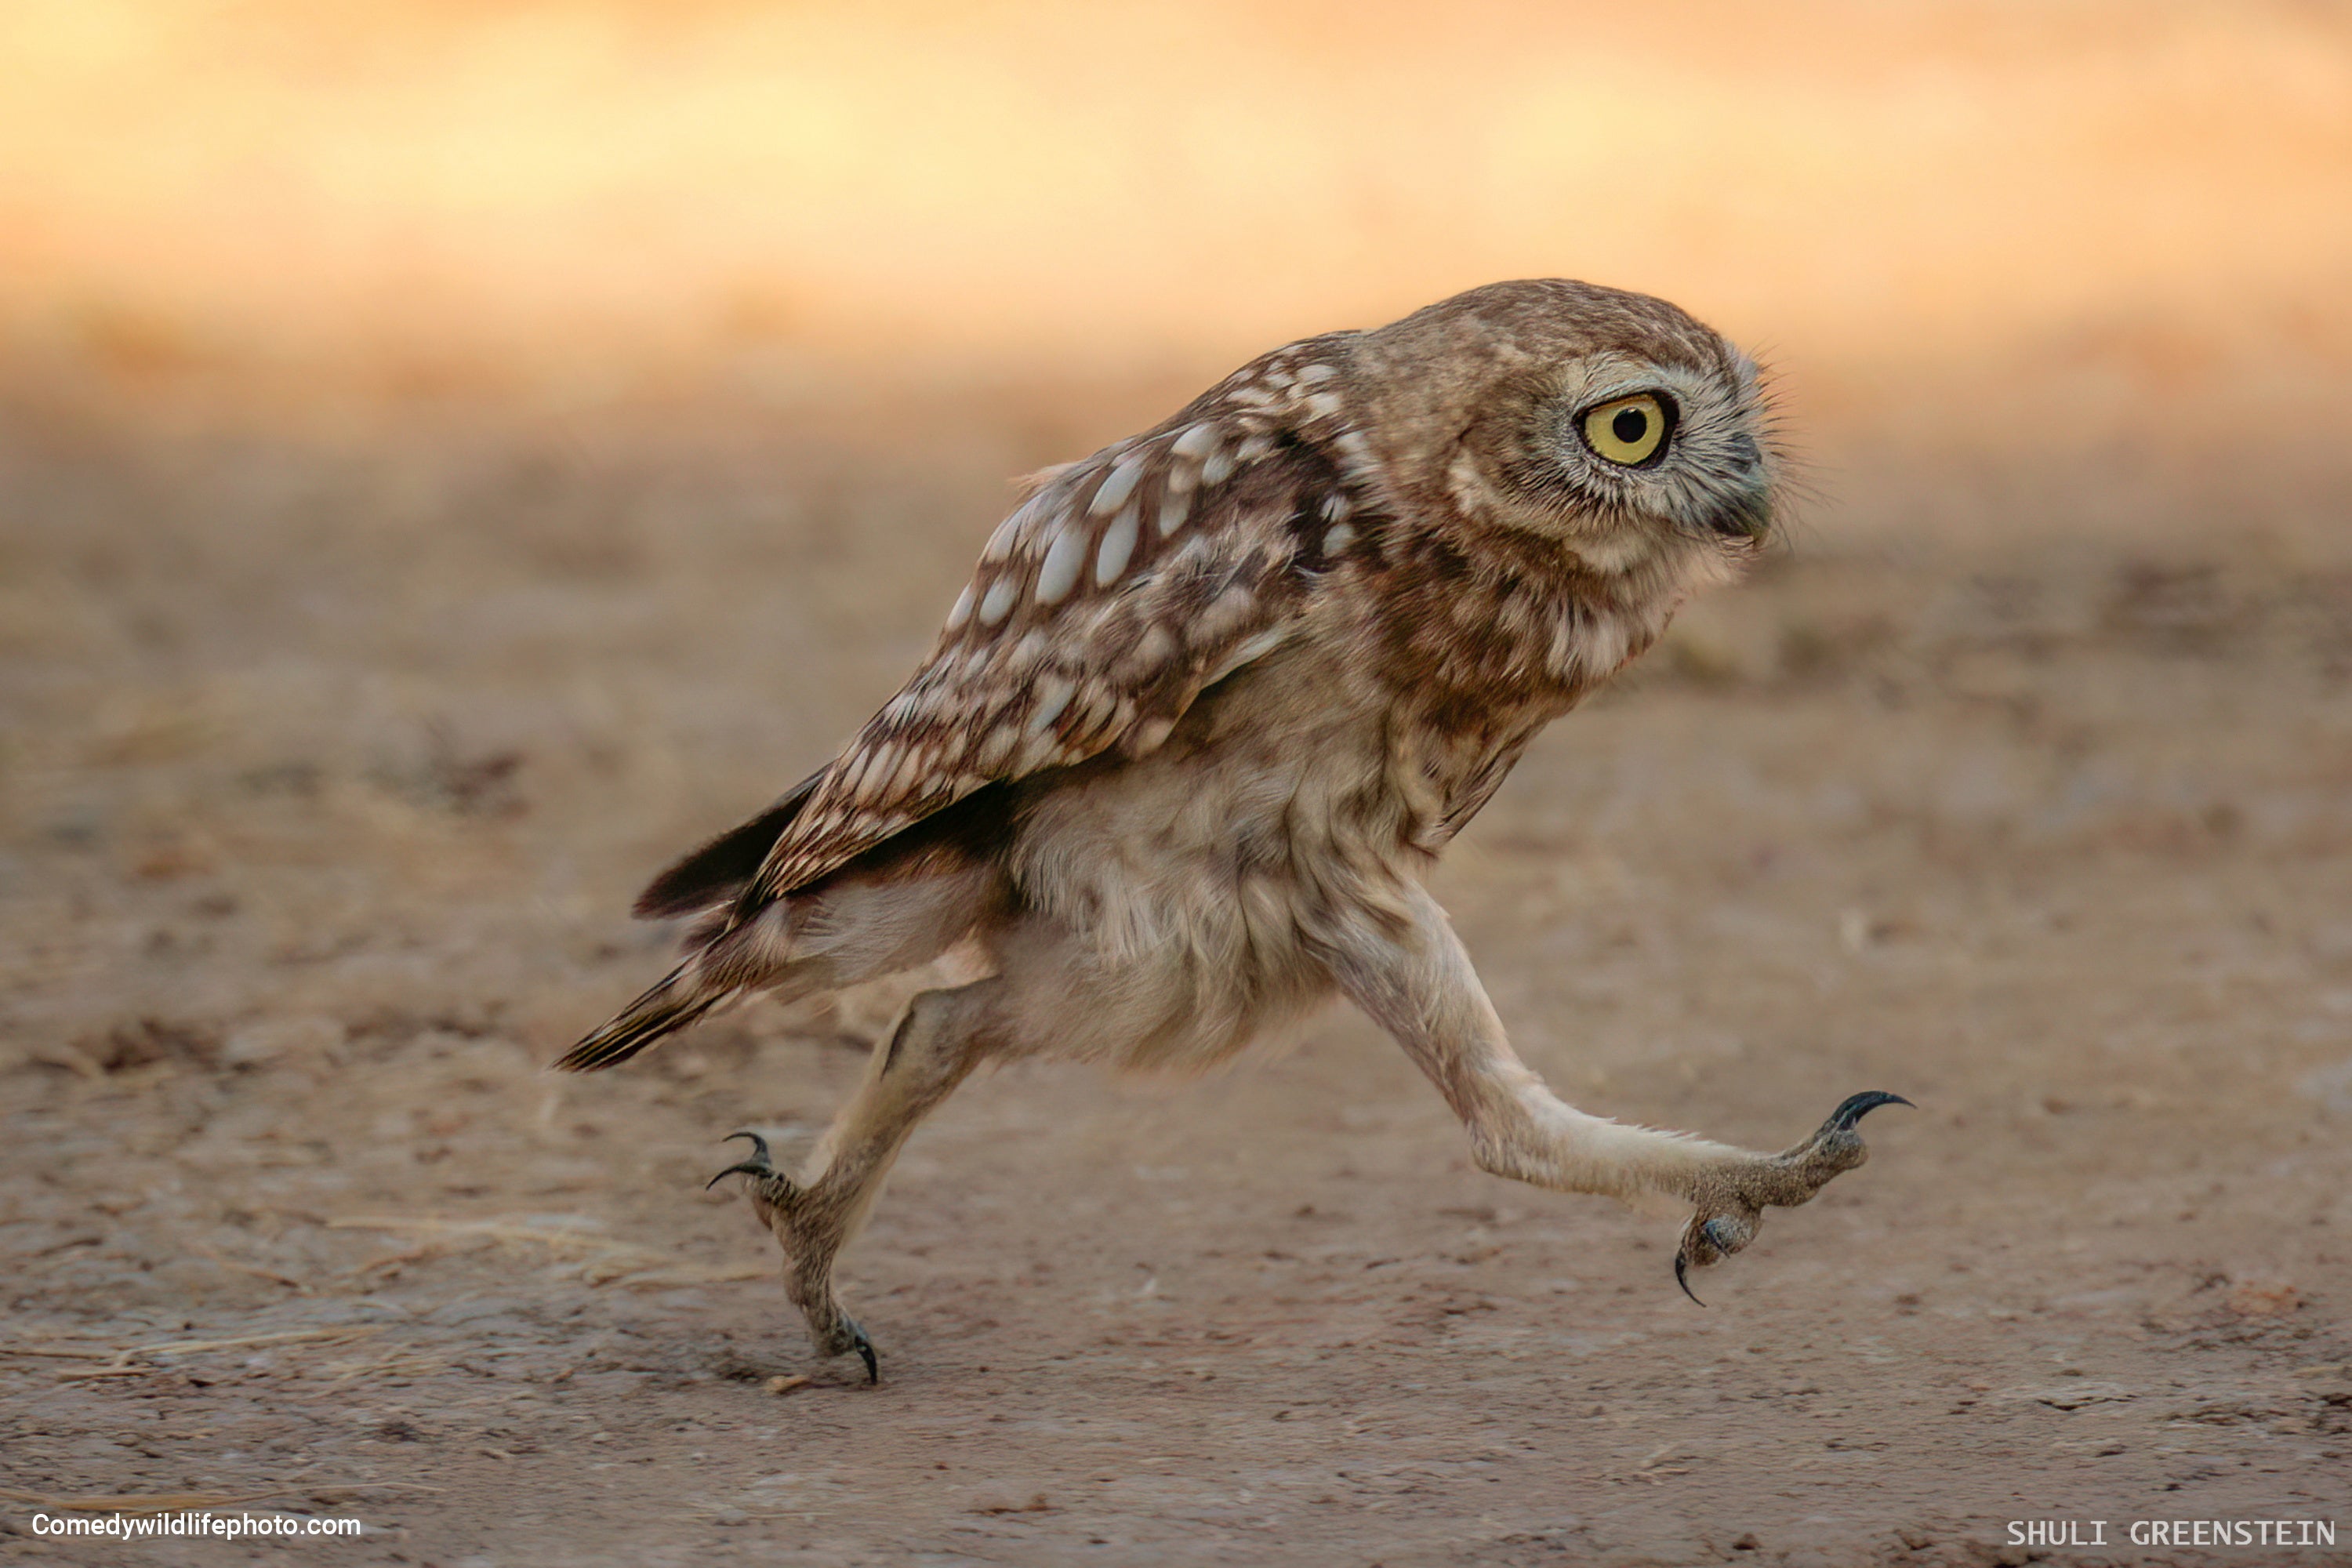 This little owl appears to be in a bit of a rush. (Photo: © Shuli Greenstein / Comedywildlifephoto.com.)